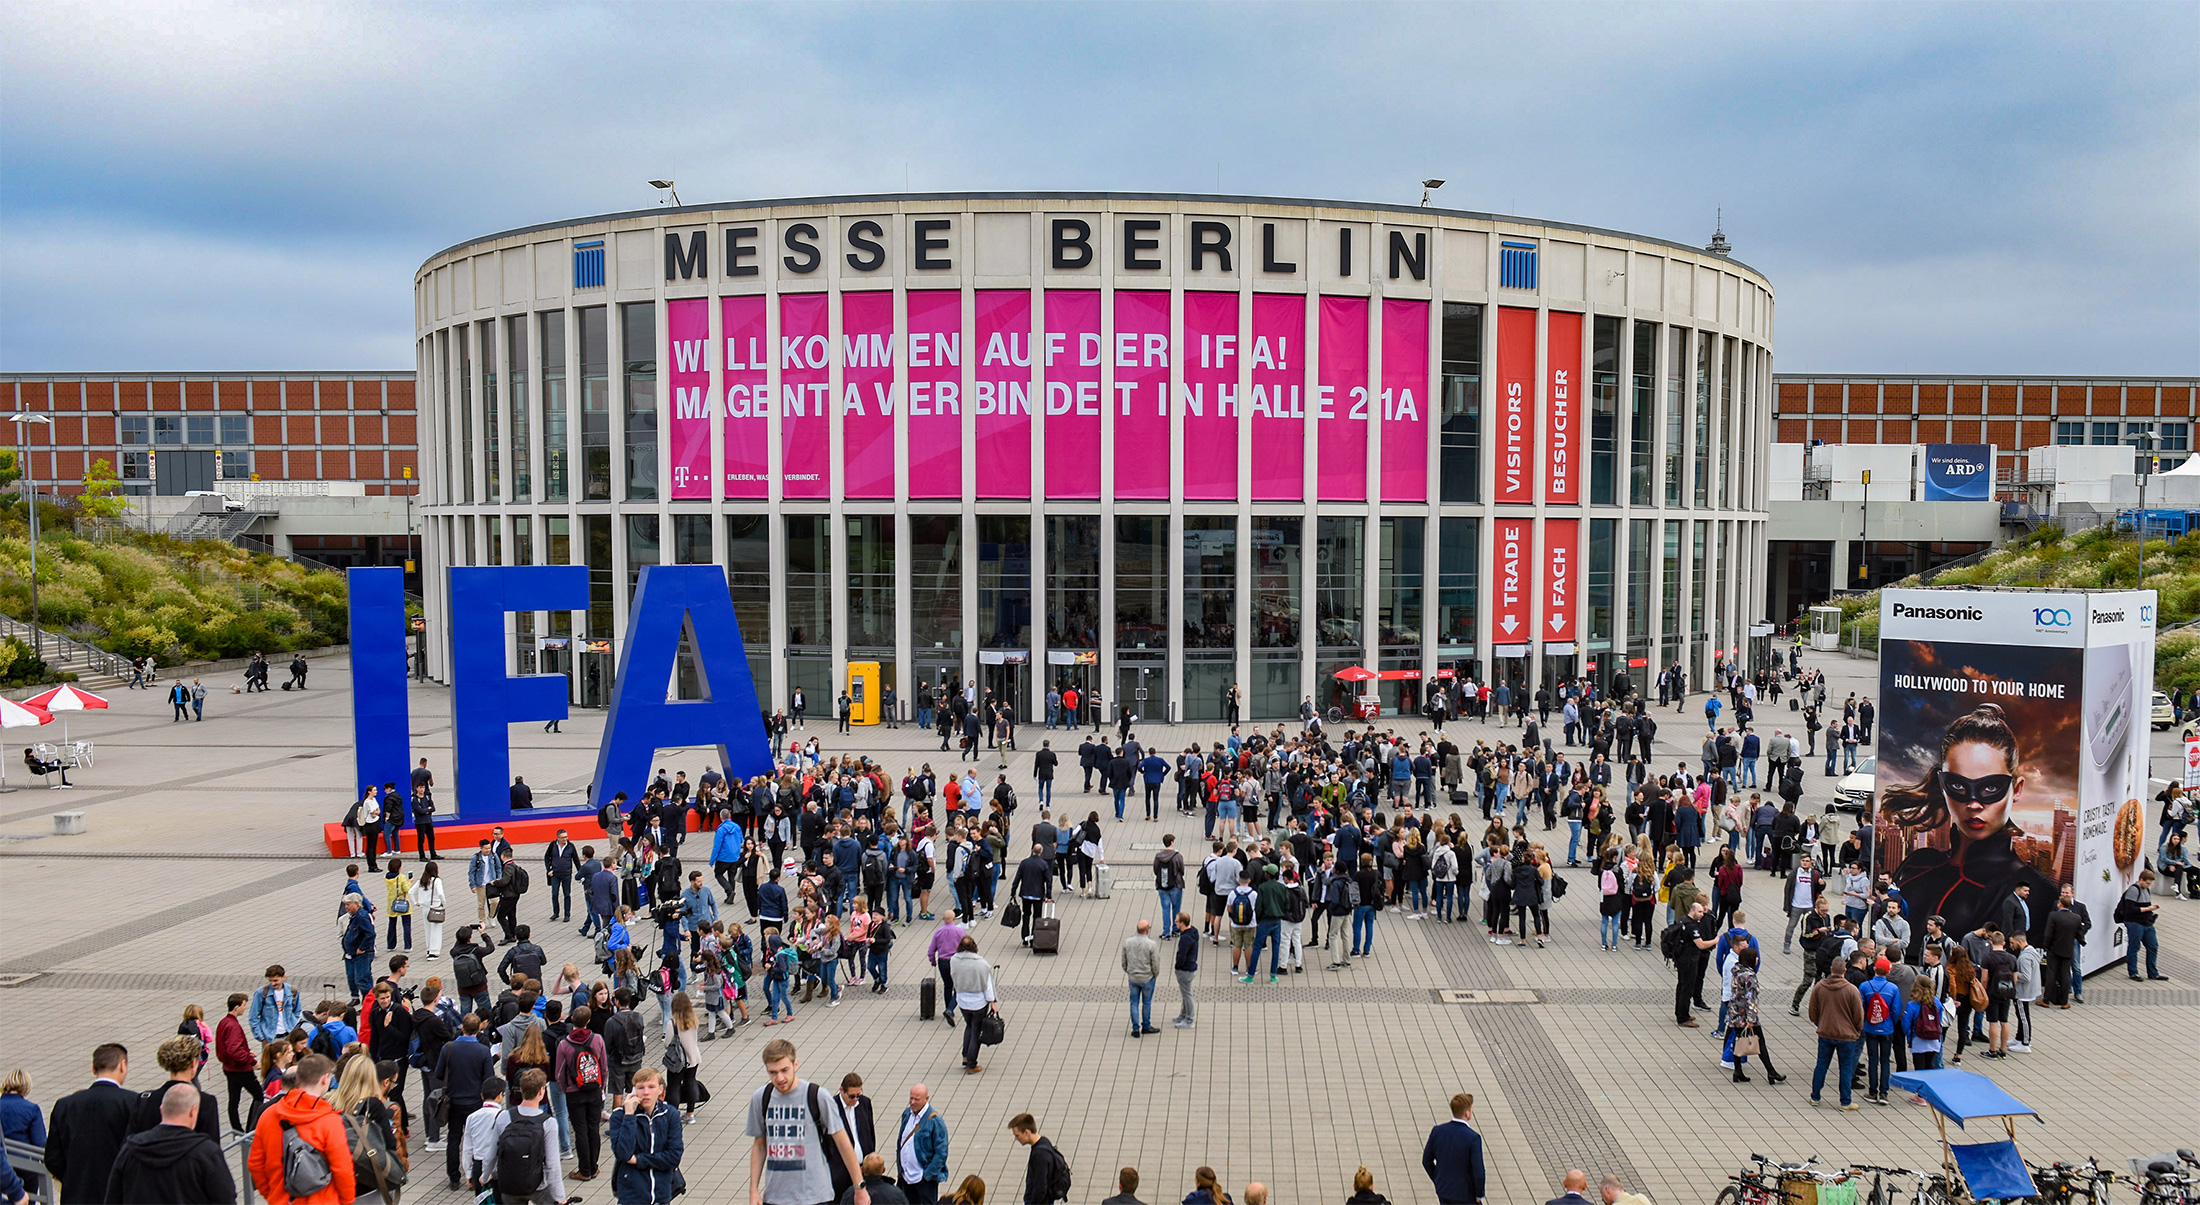 IFA 2018 Preview 8K TV, AI Everything, and All the Tech Trends to